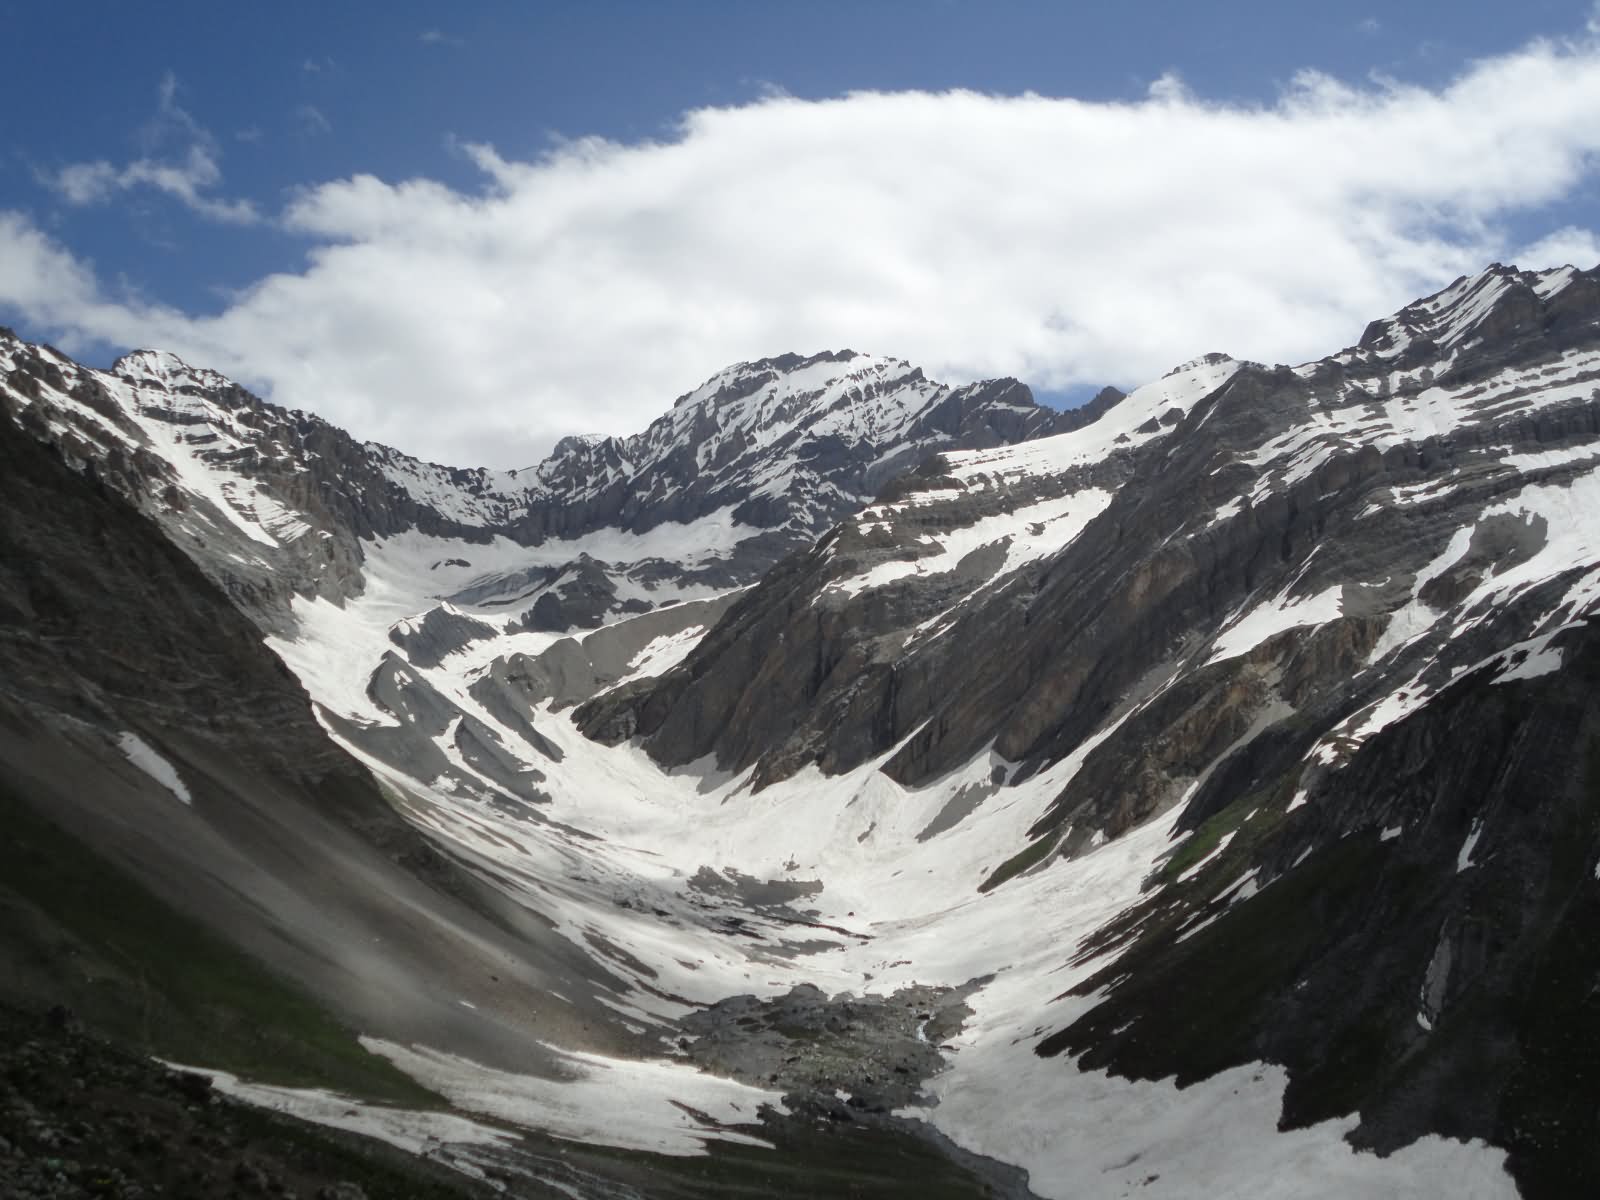 Breathtaking Scenery On Way To Amarnath Cave